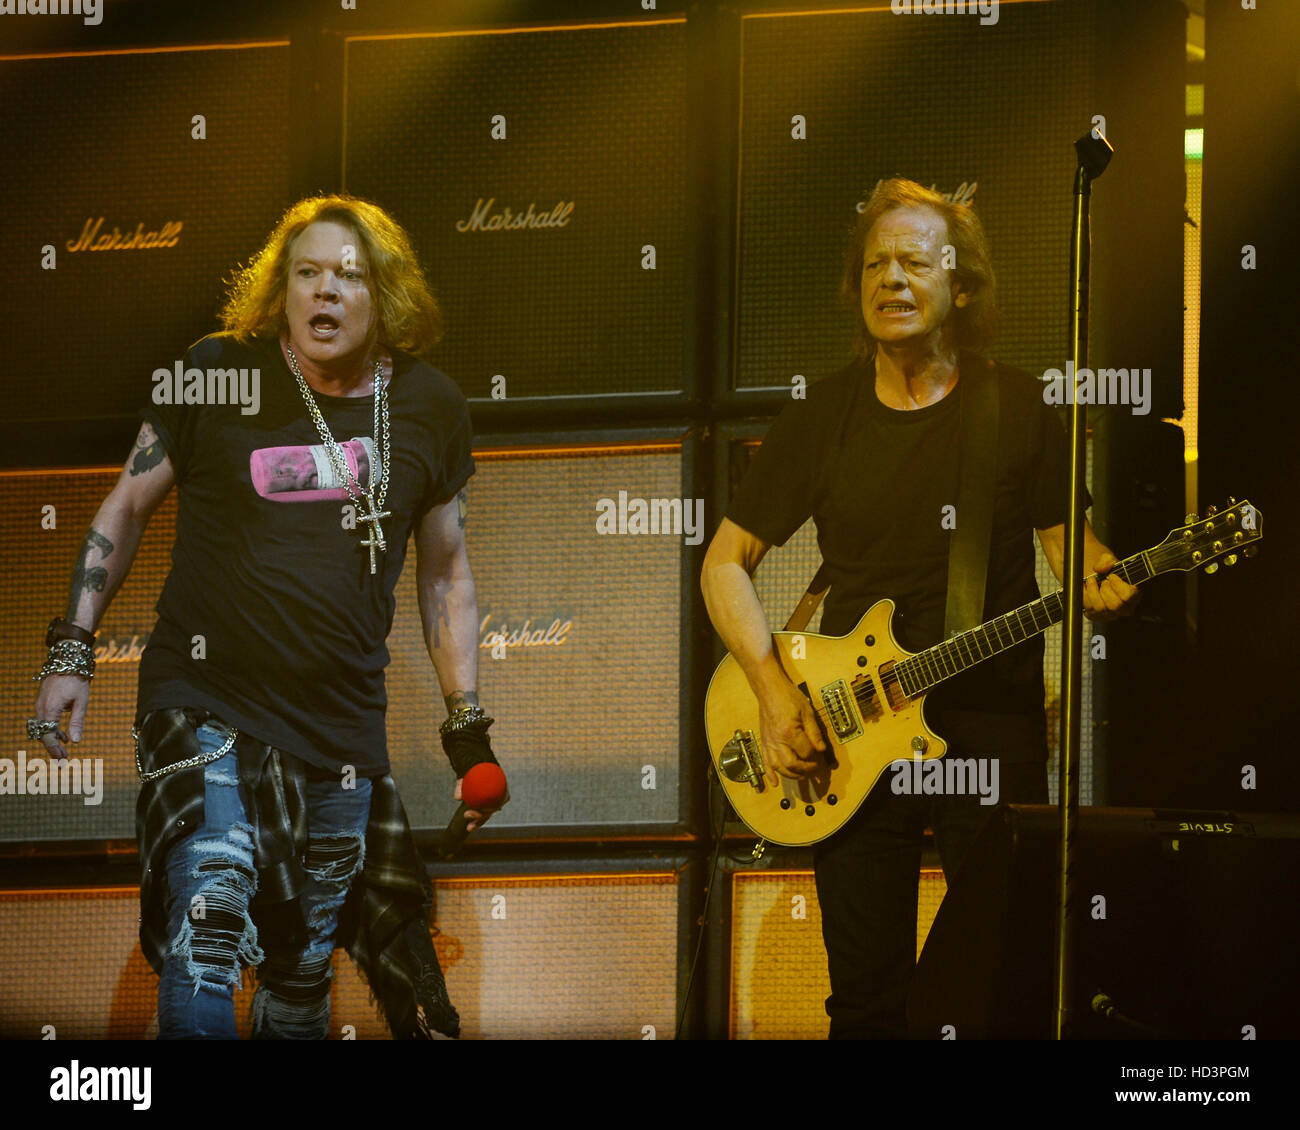 AC/DC live in concert Axl Rose, Stevie Young Where: Sunrise, Florida, United States When: 31 Aug 2016 Stock Photo - Alamy